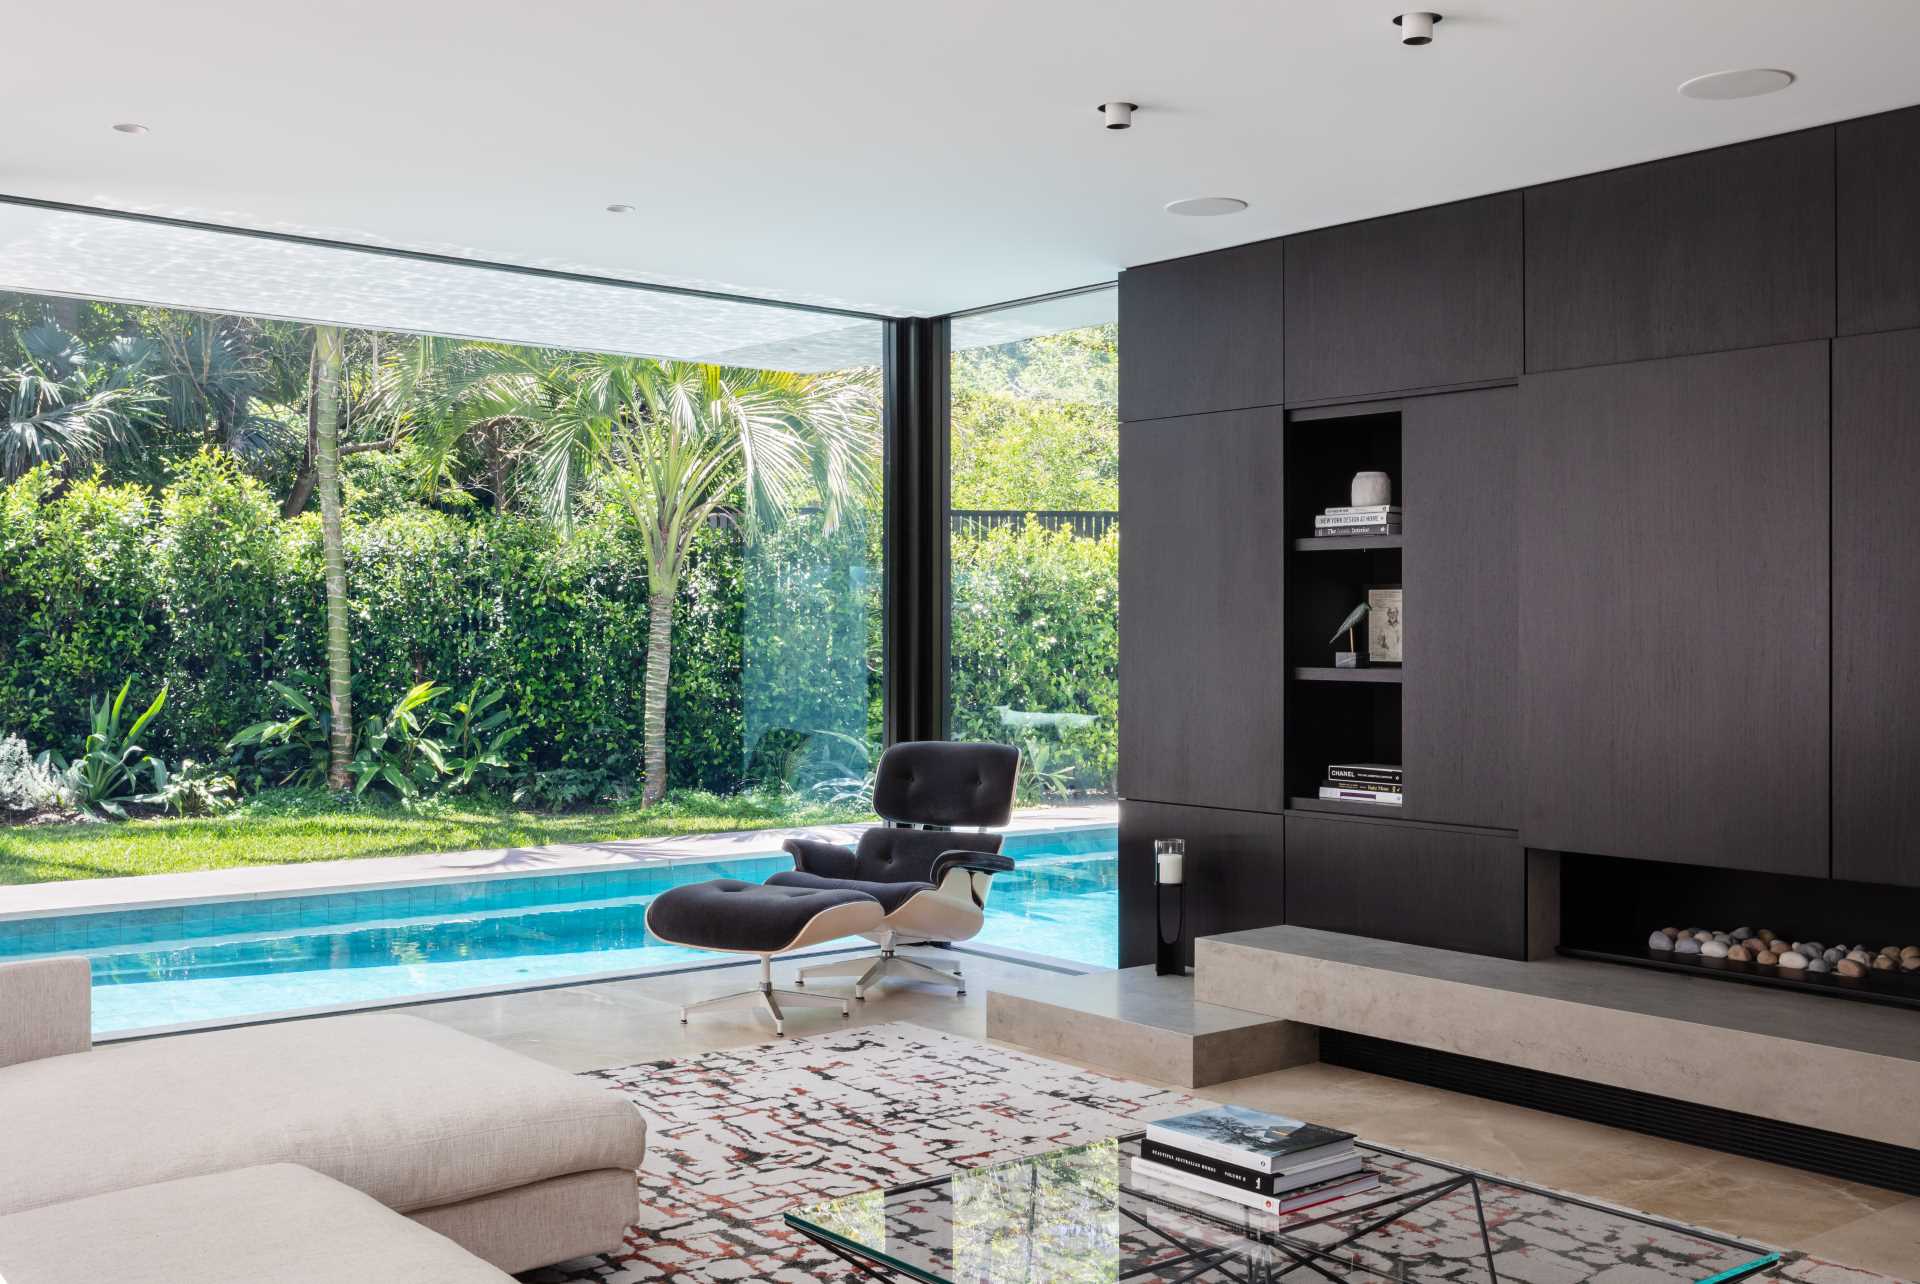 A modern living room with floor to ceiling windows and views of the pool.